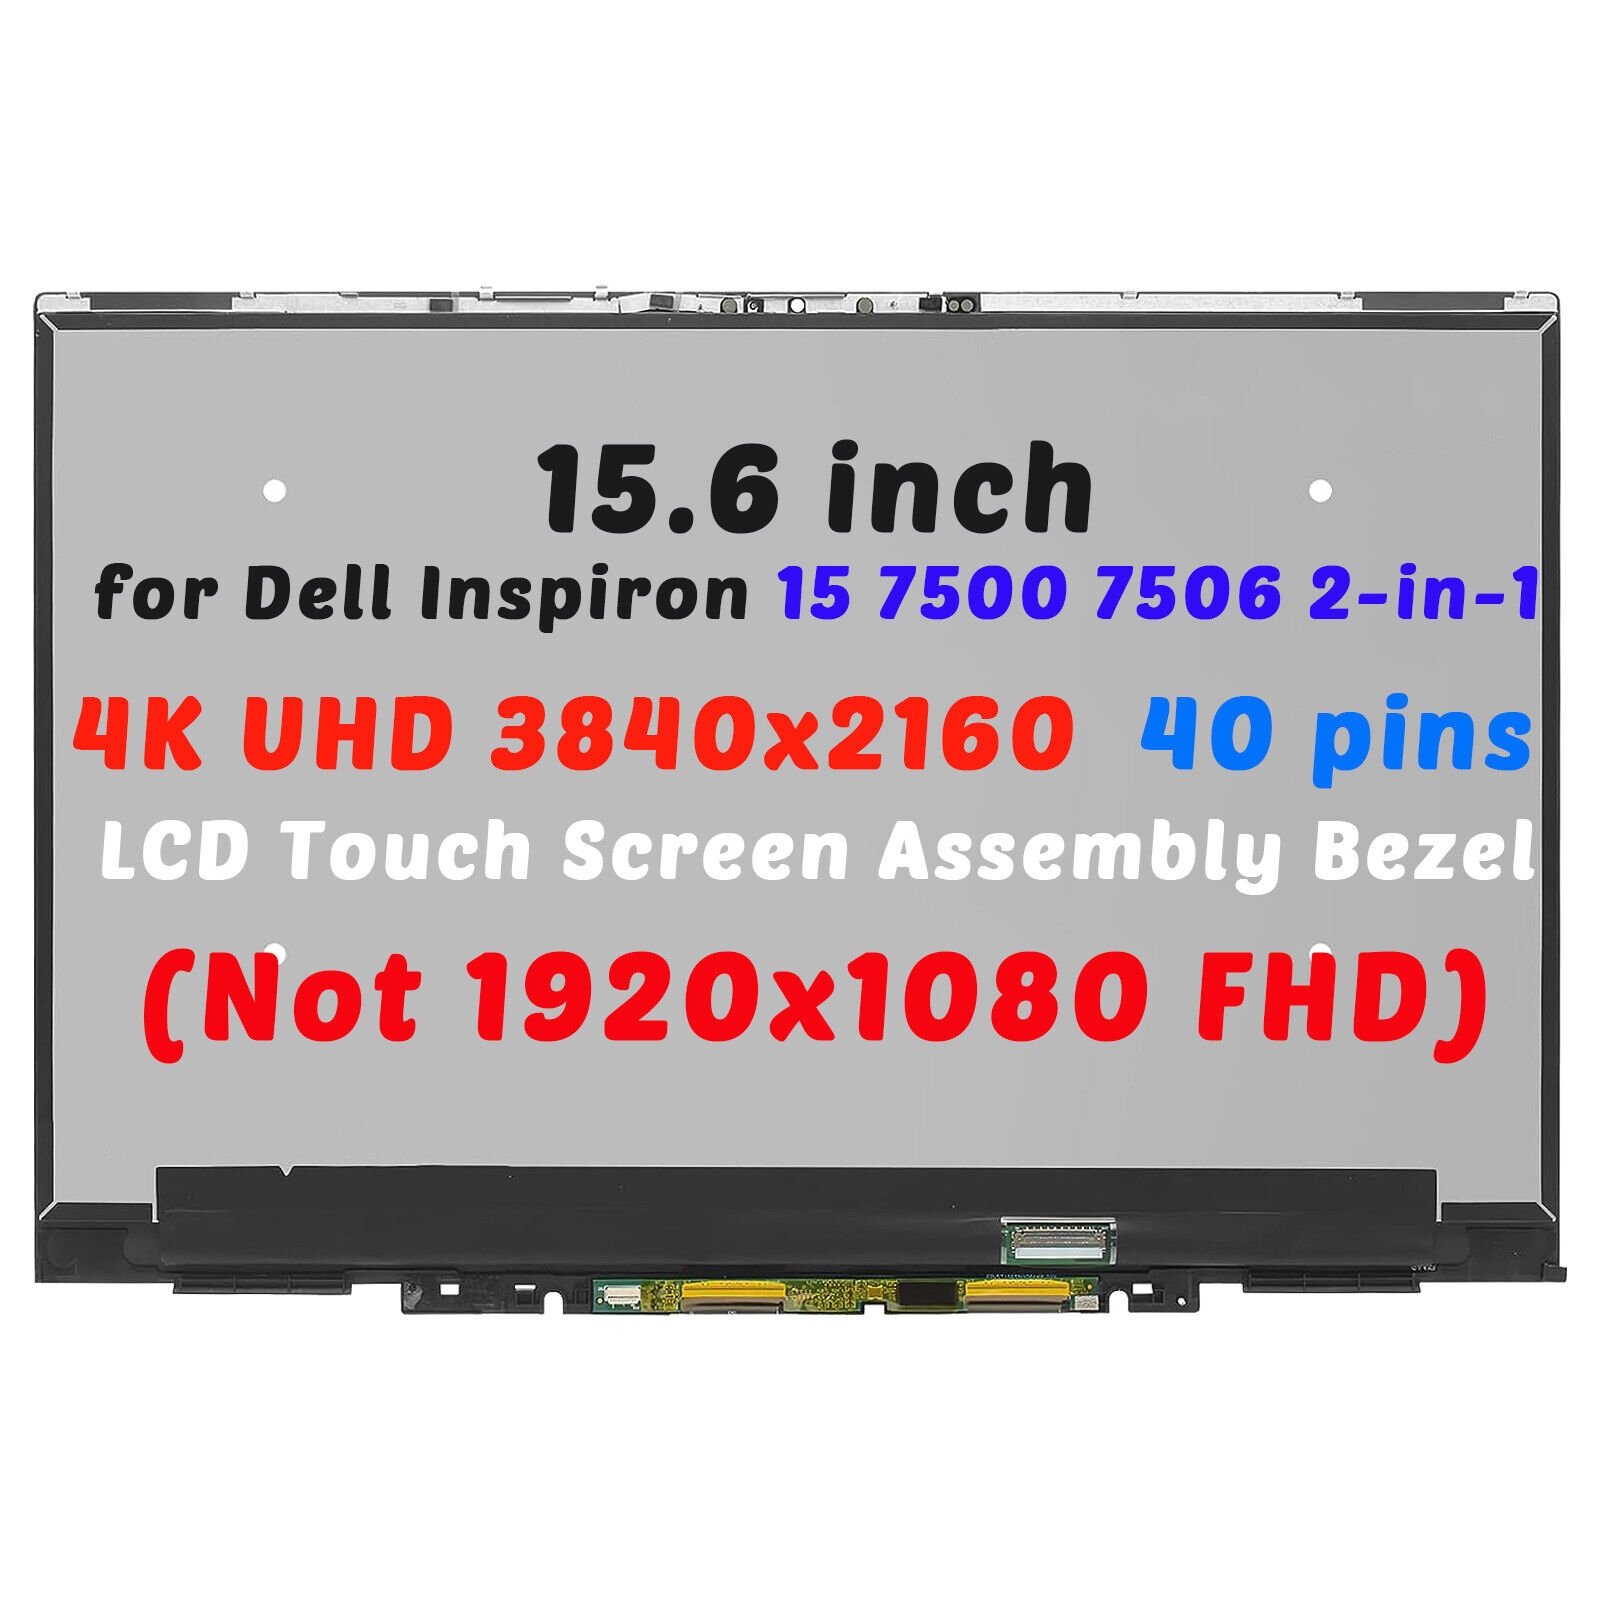 4K UHD LCD Touch Screen Assembly for Dell Inspiron 15 7506 P97F003 B156ZAT01.0